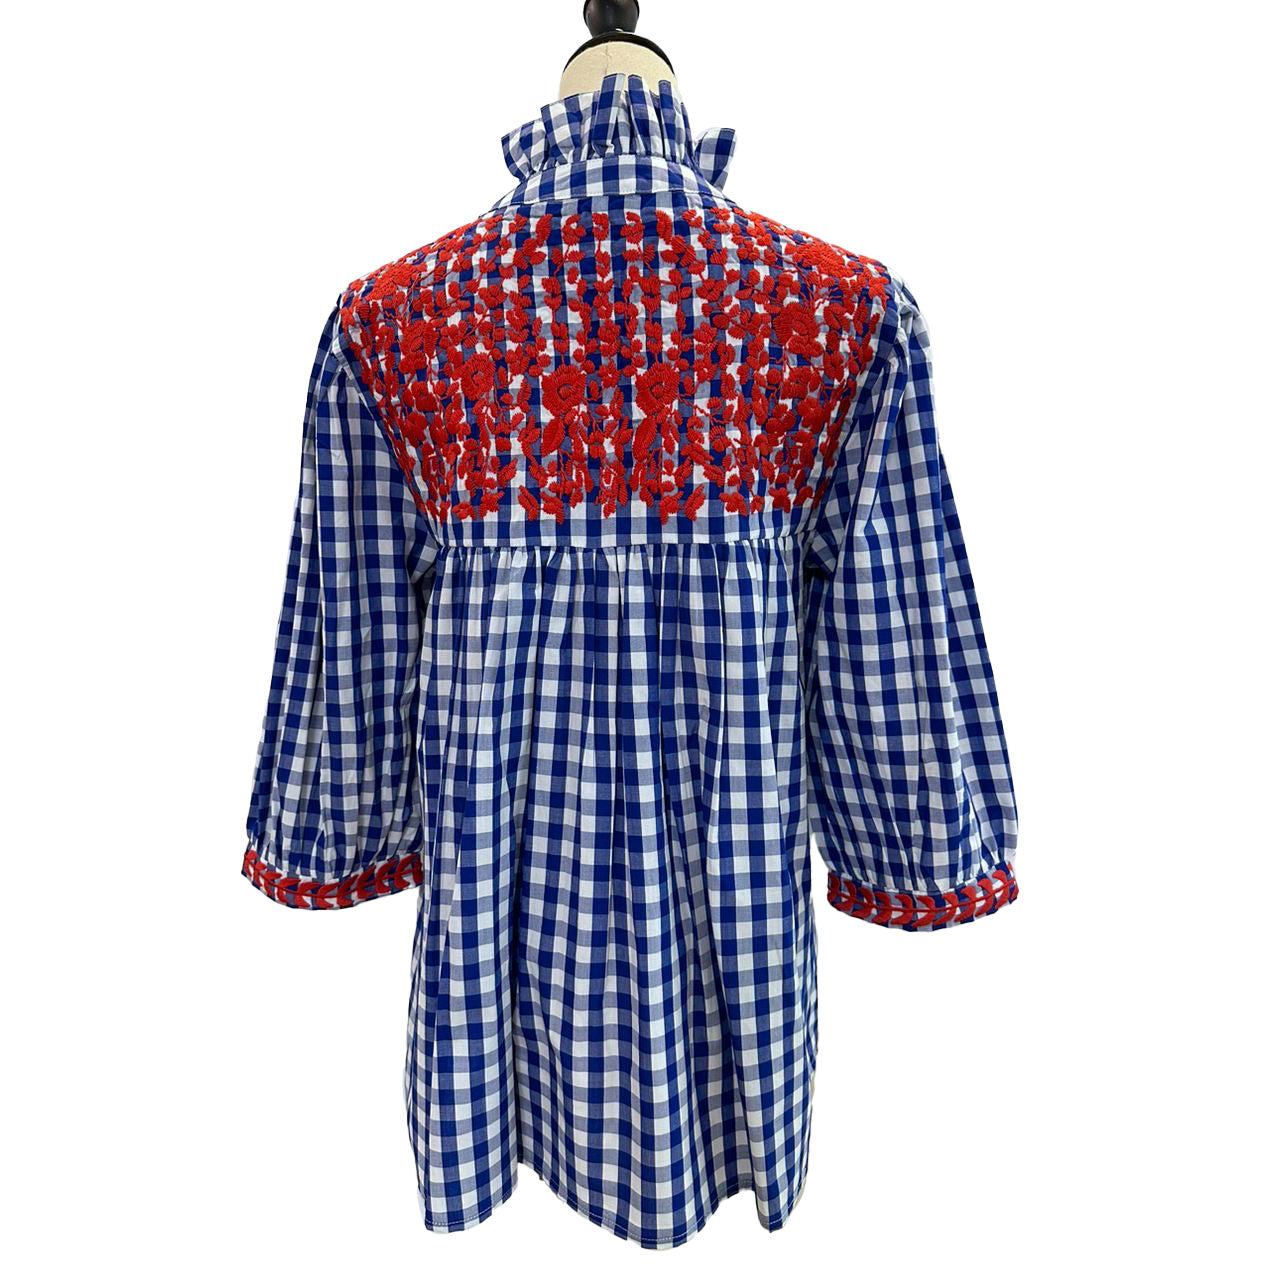 PRE-ORDER: Fourth of July Buffalo Check Tailgater Blouse (mid-June delivery)